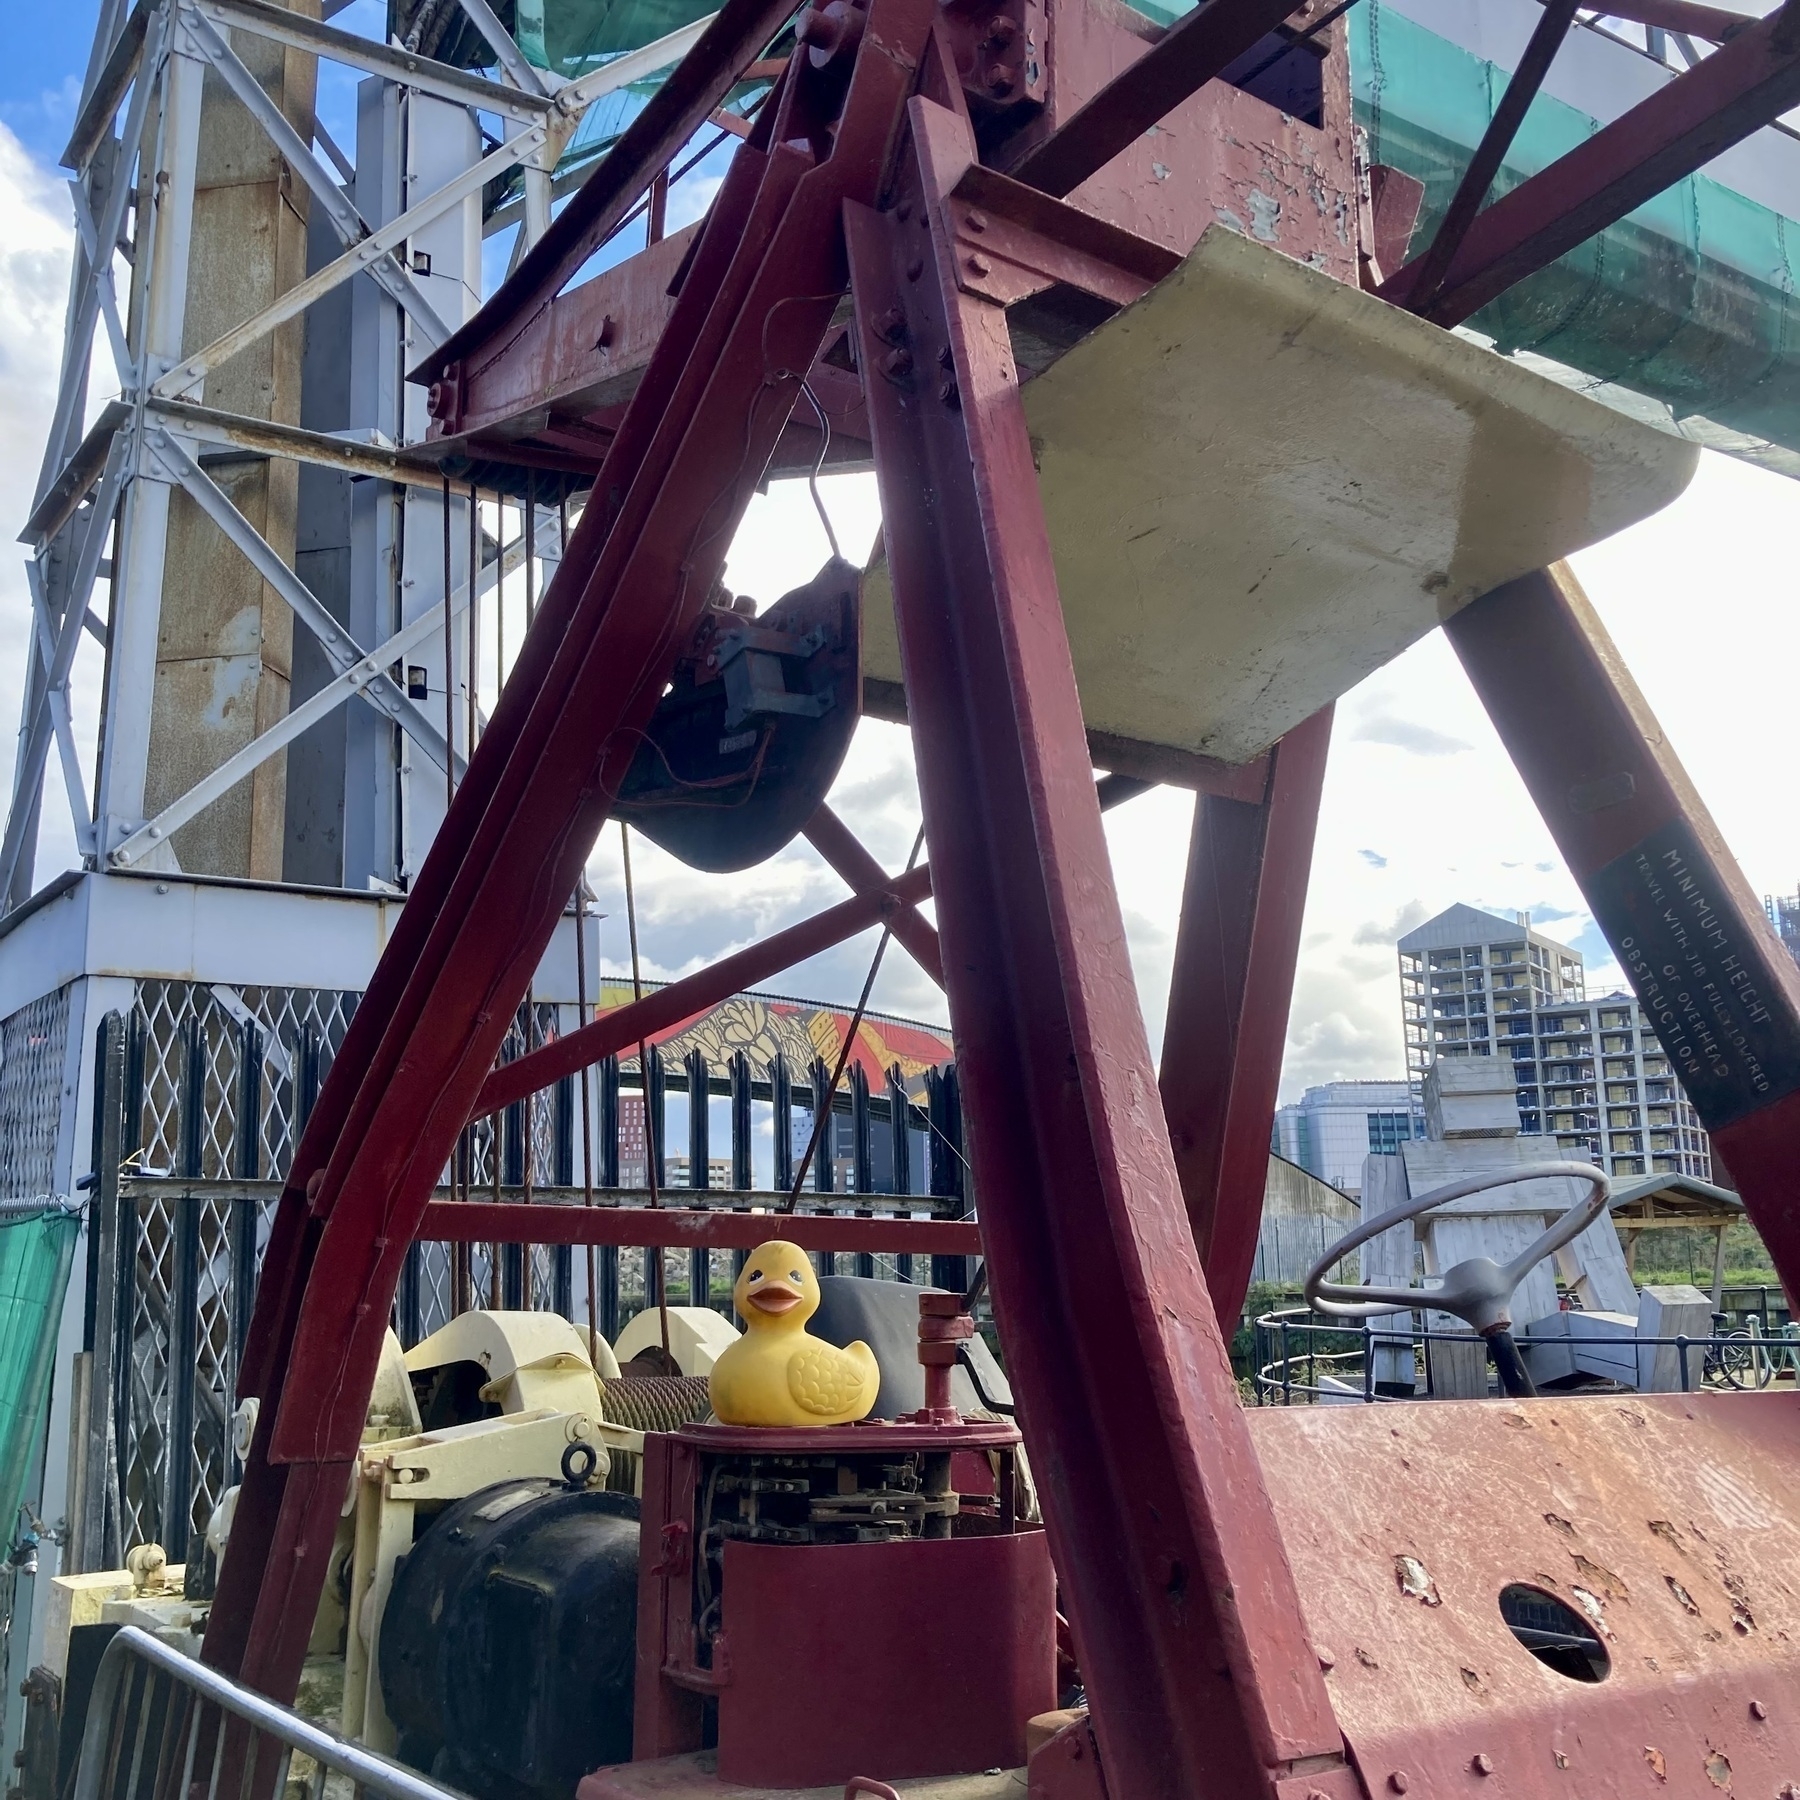 A yellow toy bathtub duck sits on a pre-war red-painted cast-iron crane at Cody Dock